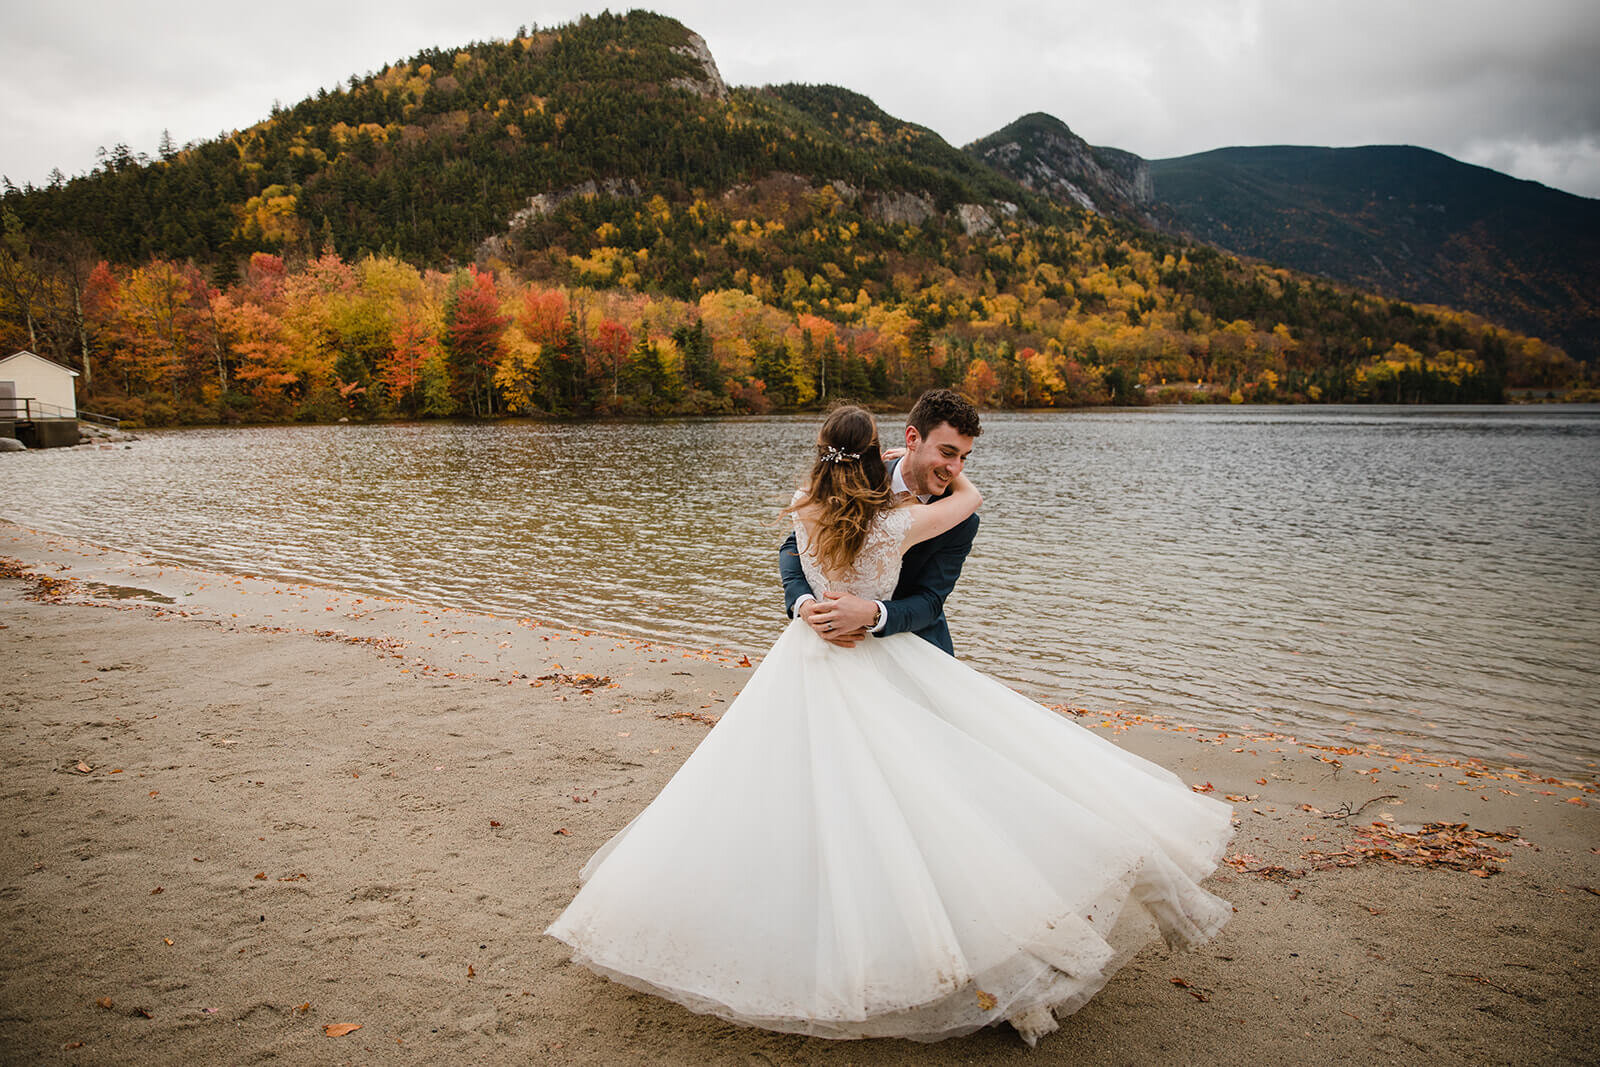  Couple explores the beach in the rainy misty weather in Franconia Notch State Park in New Hampshire after their elopement ceremony. New Hampshire elopement packages. 